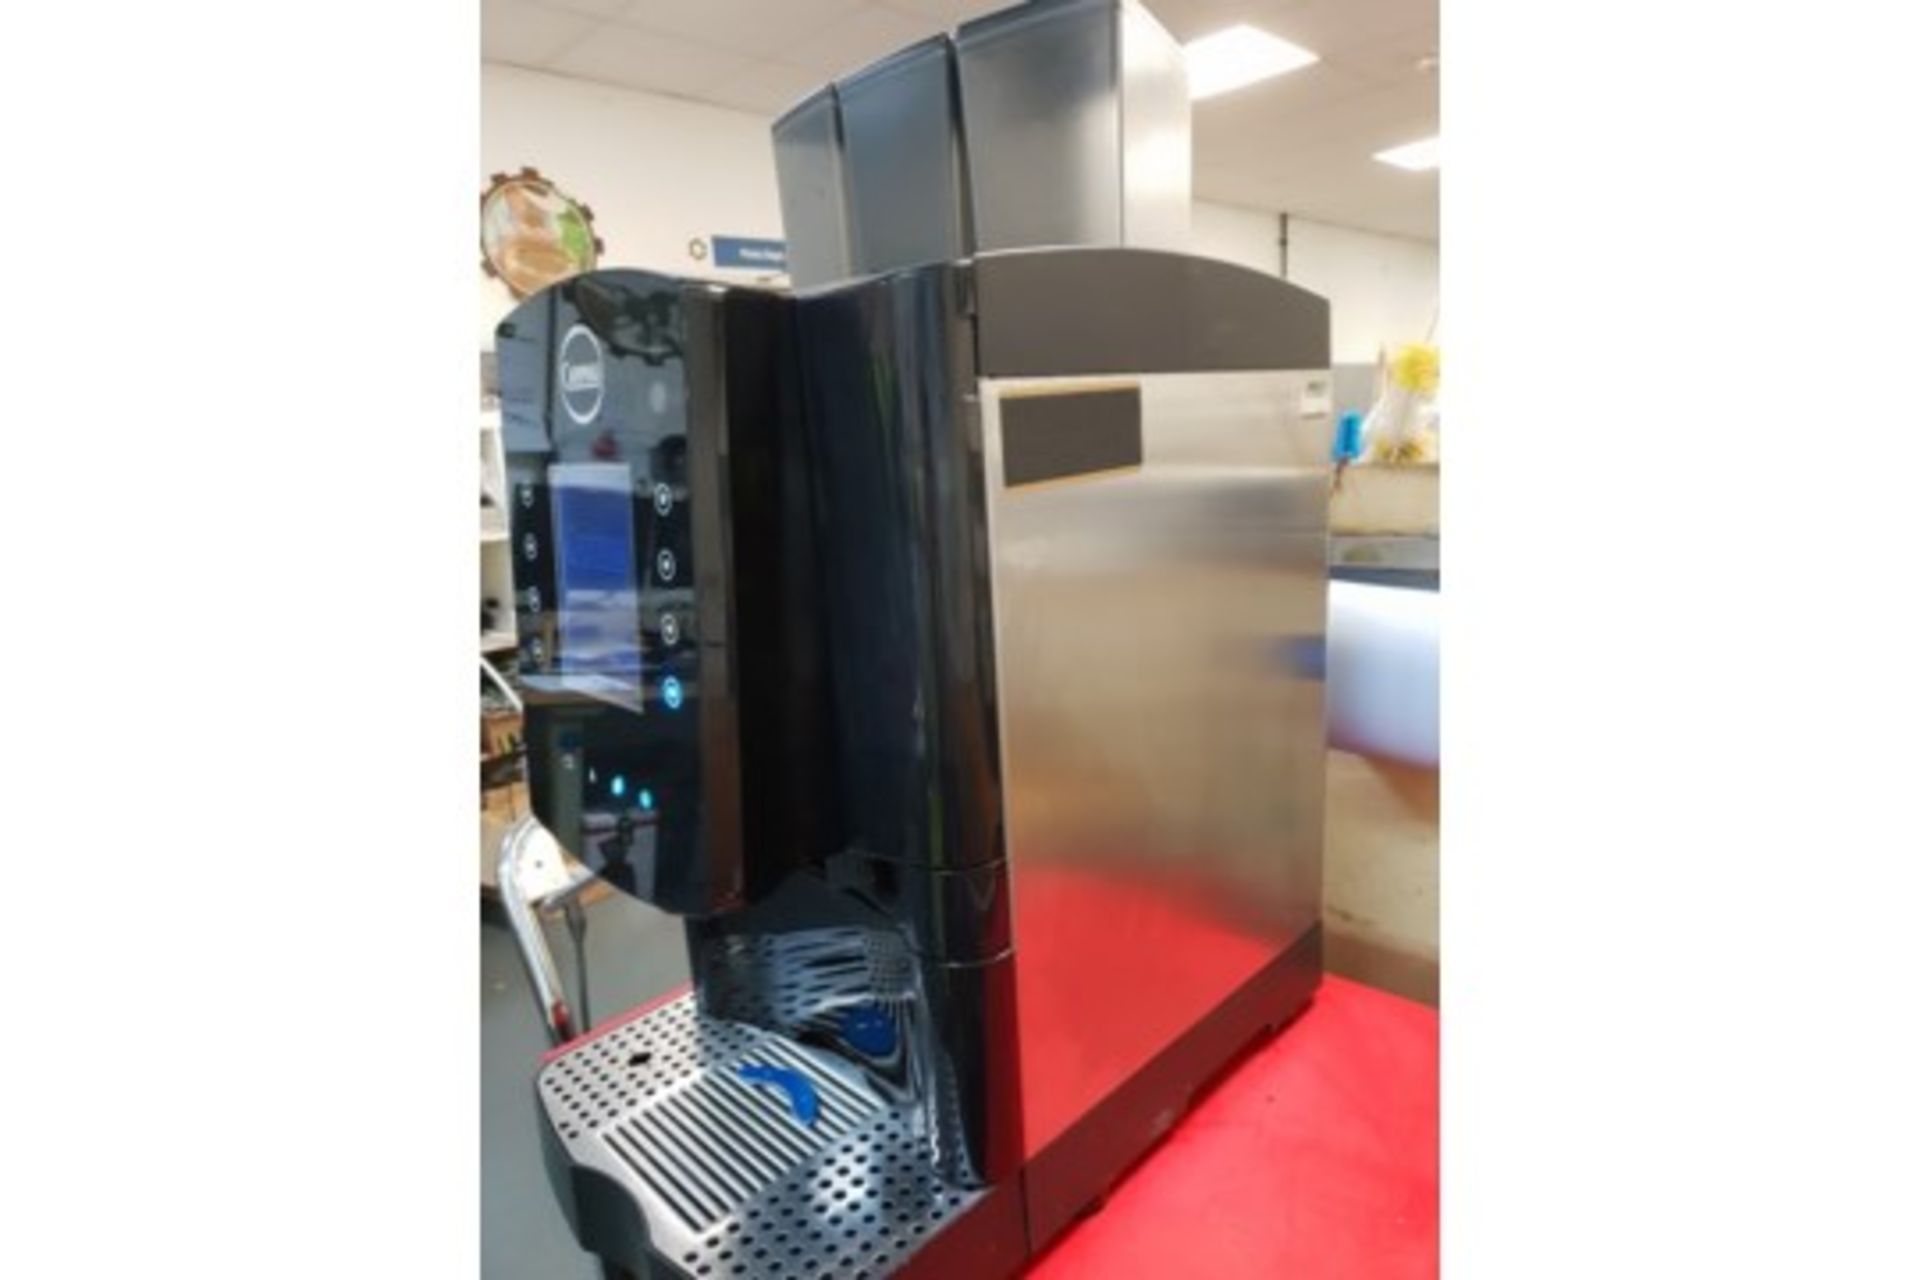 Carimali Solar Touch Drinks Machine – Bean to cup Coffee + Chocolate & Other Drinks - Image 2 of 6